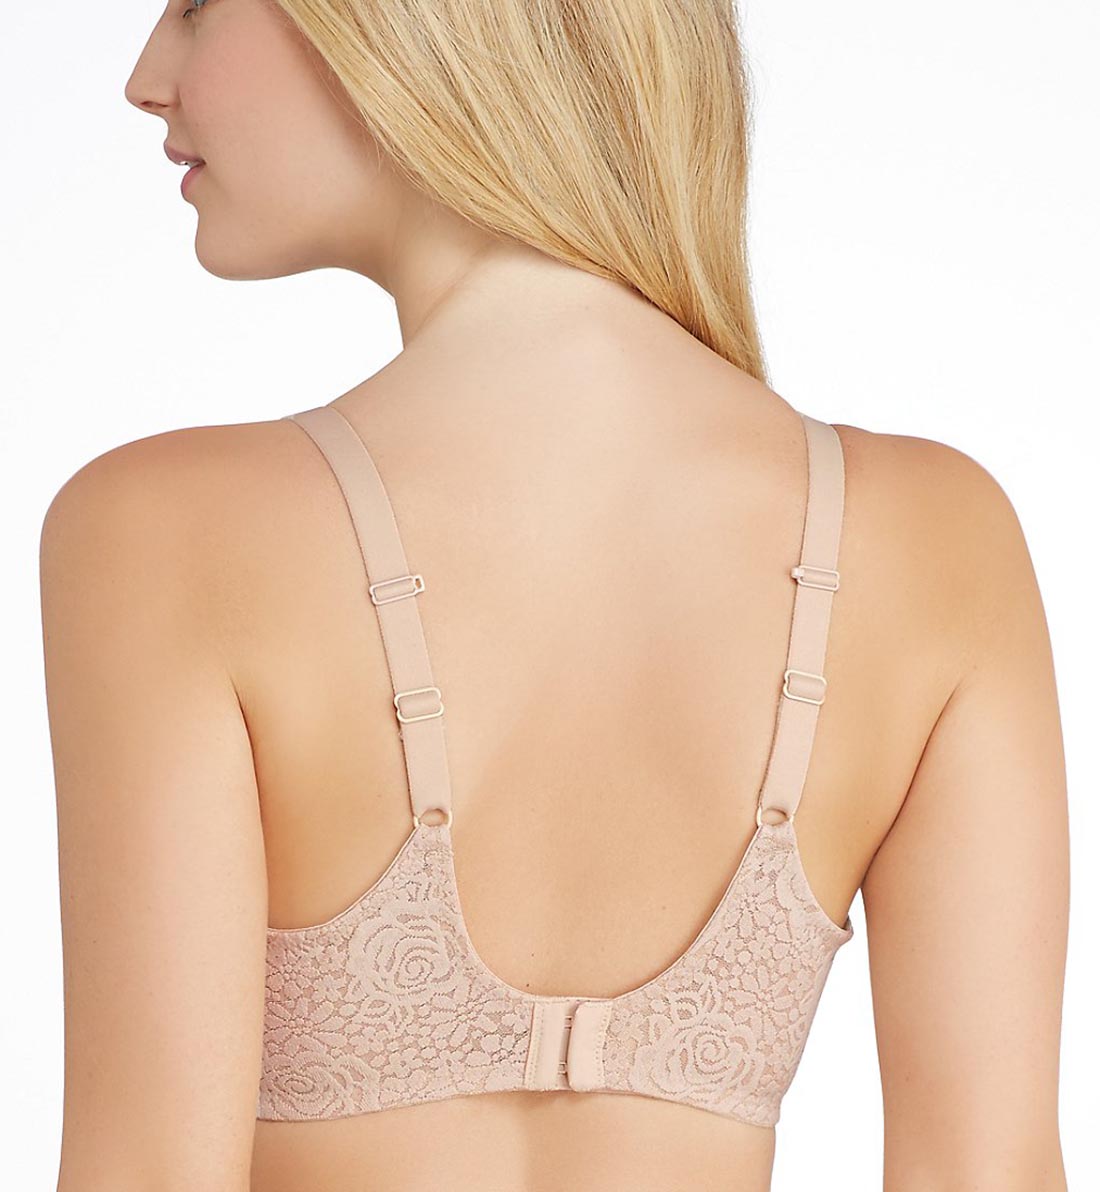 Wacoal Halo Lace Seamless Underwire J-Hook Bra (851205),36D,Natural Nude - Natural Nude,36D